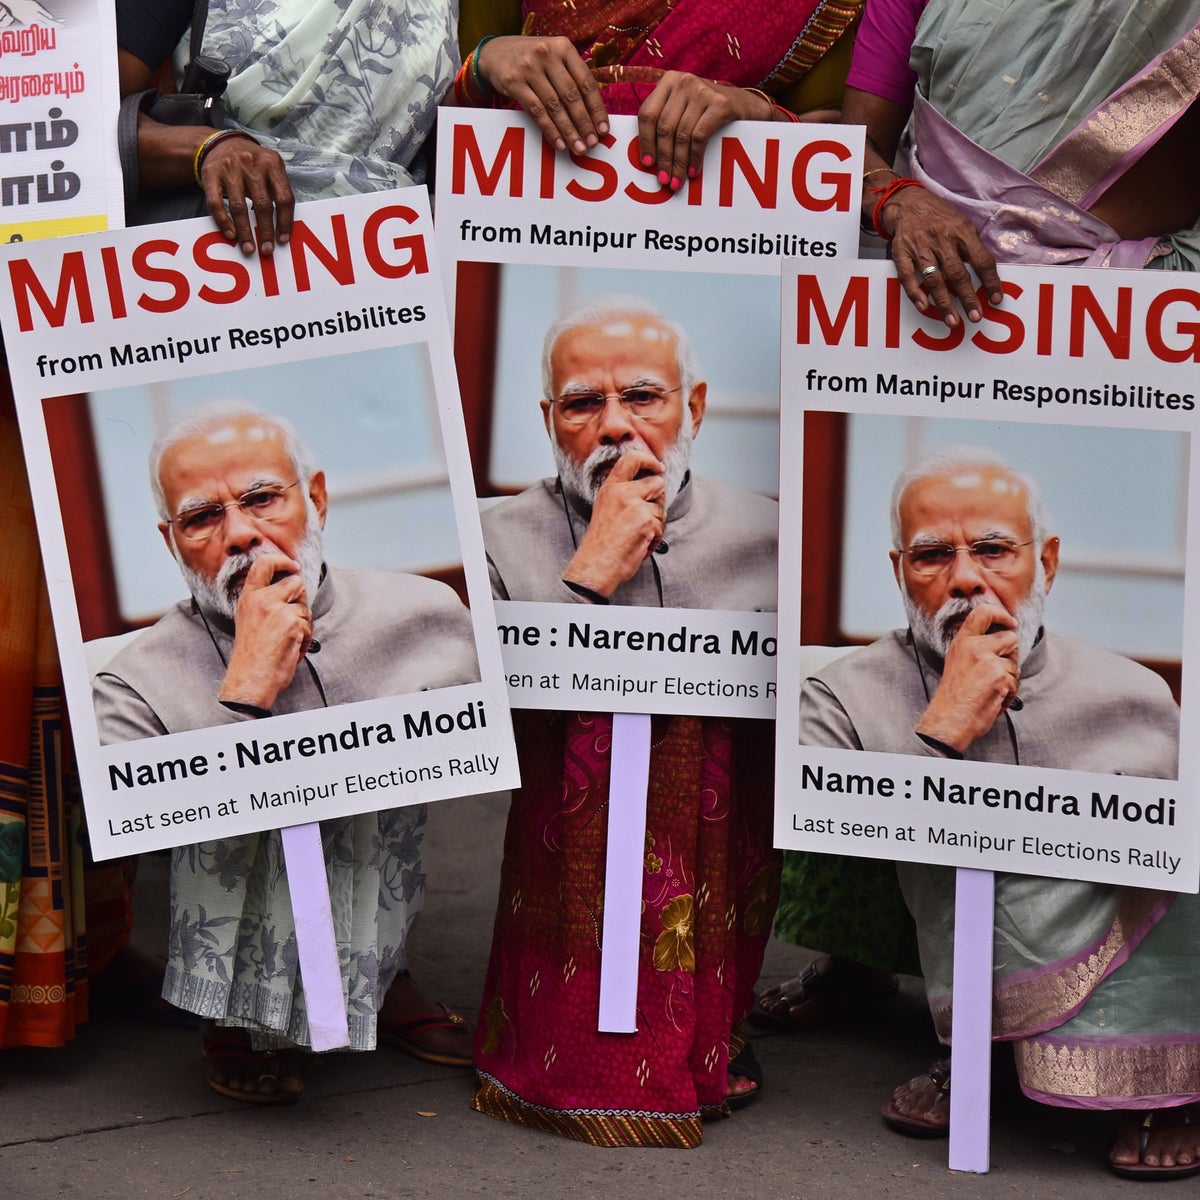 Narendra Modi faces no-confidence motion over failure to tackle Manipur violence | The Independent